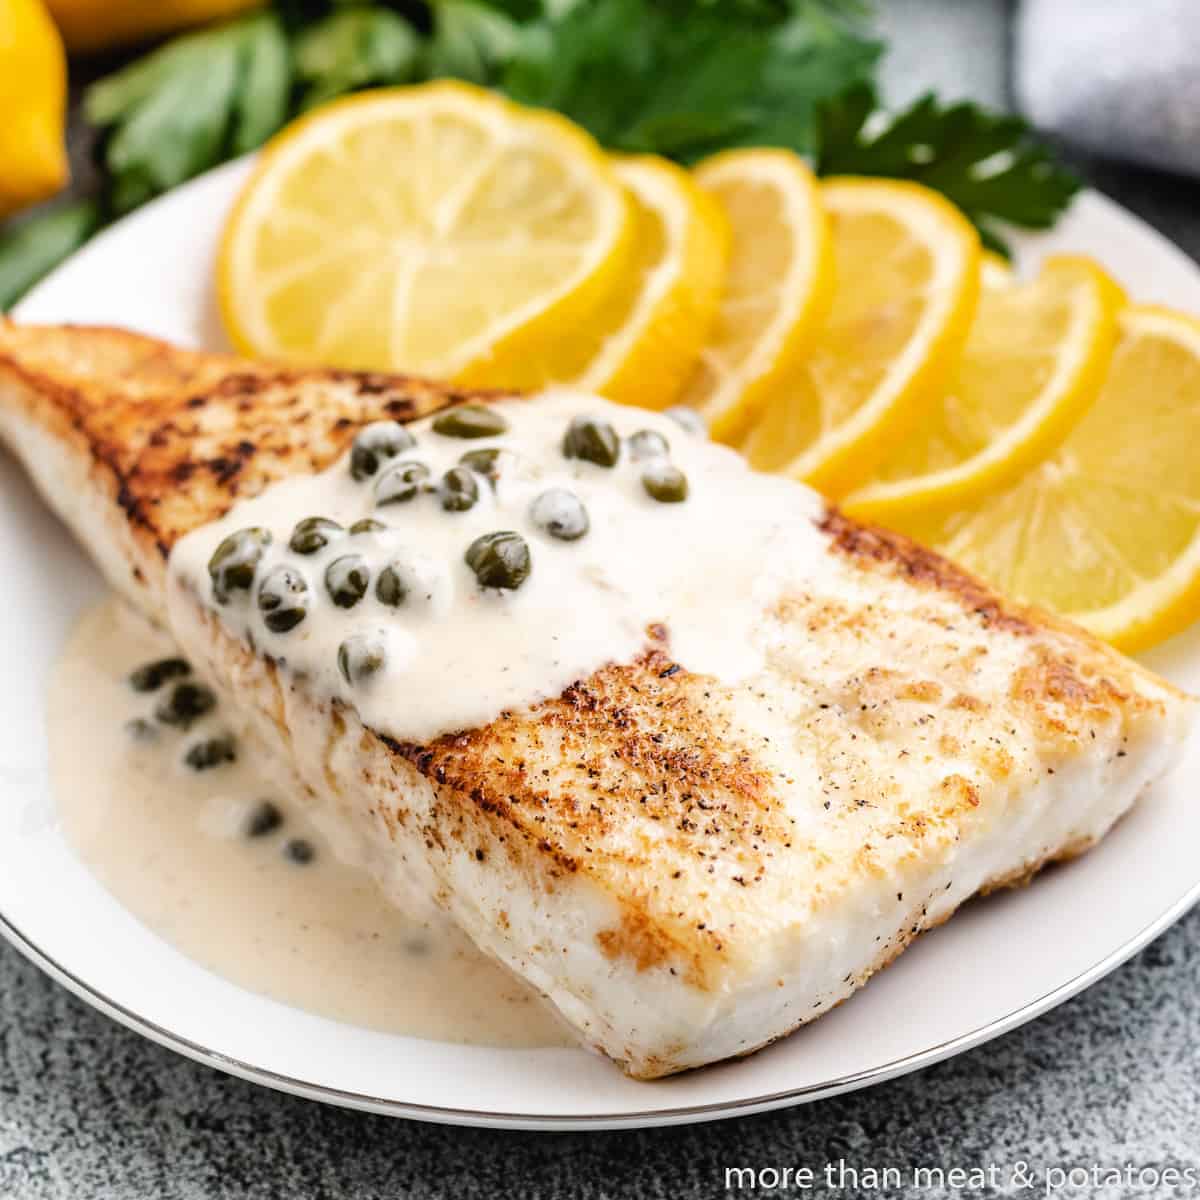 Pan seared halibut served with lemon caper sauce.